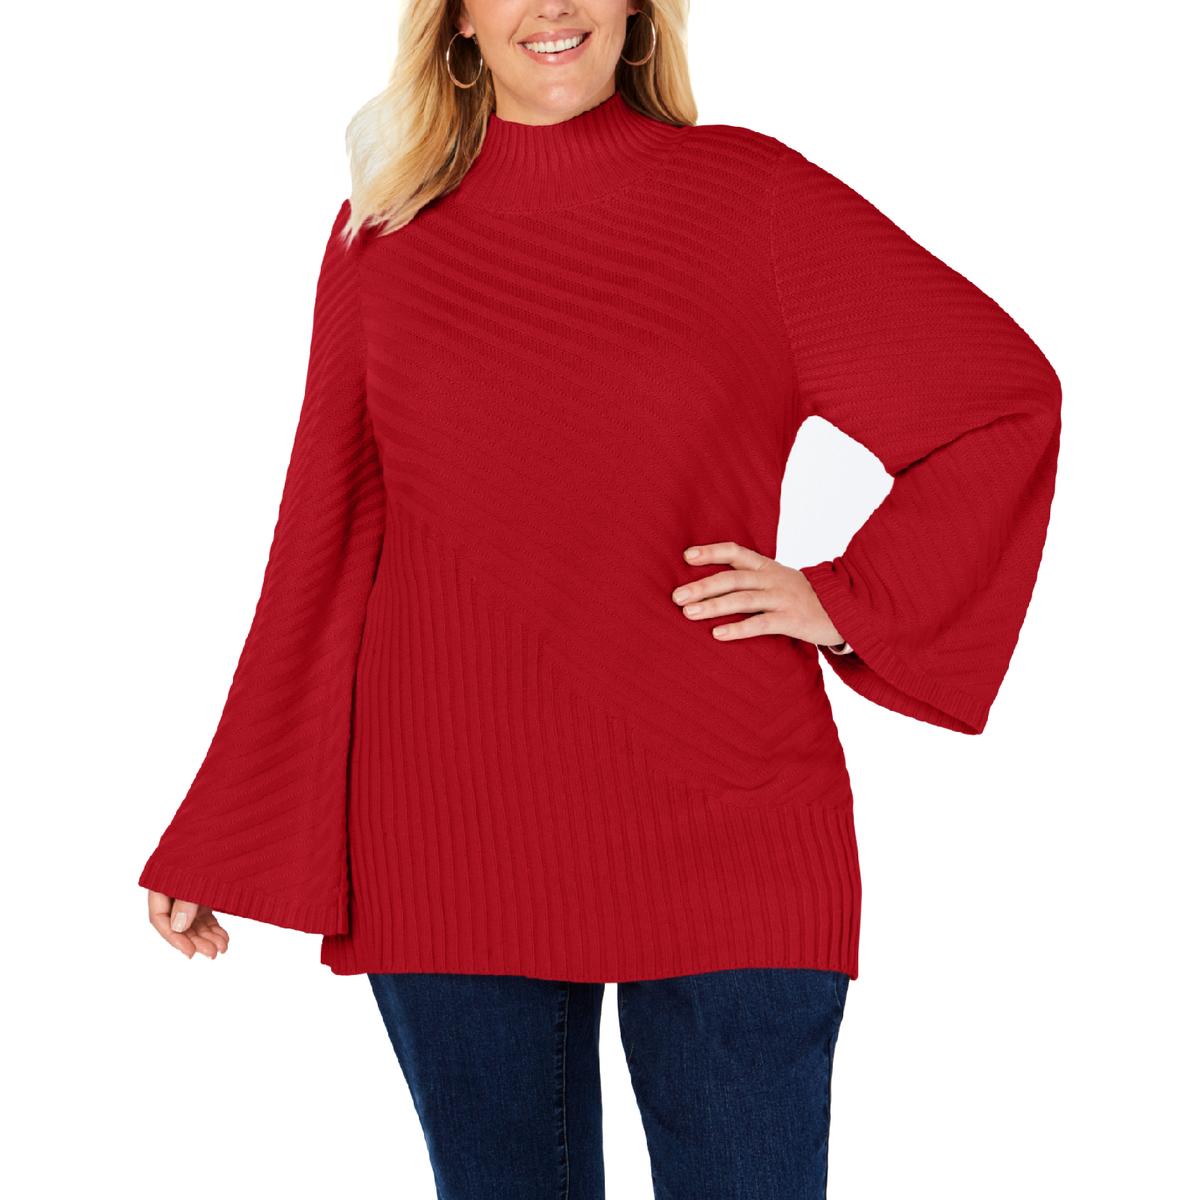 Charter Club Womens Red Mock Neck Bell Sleeves Pullover Sweater Top 3X ...